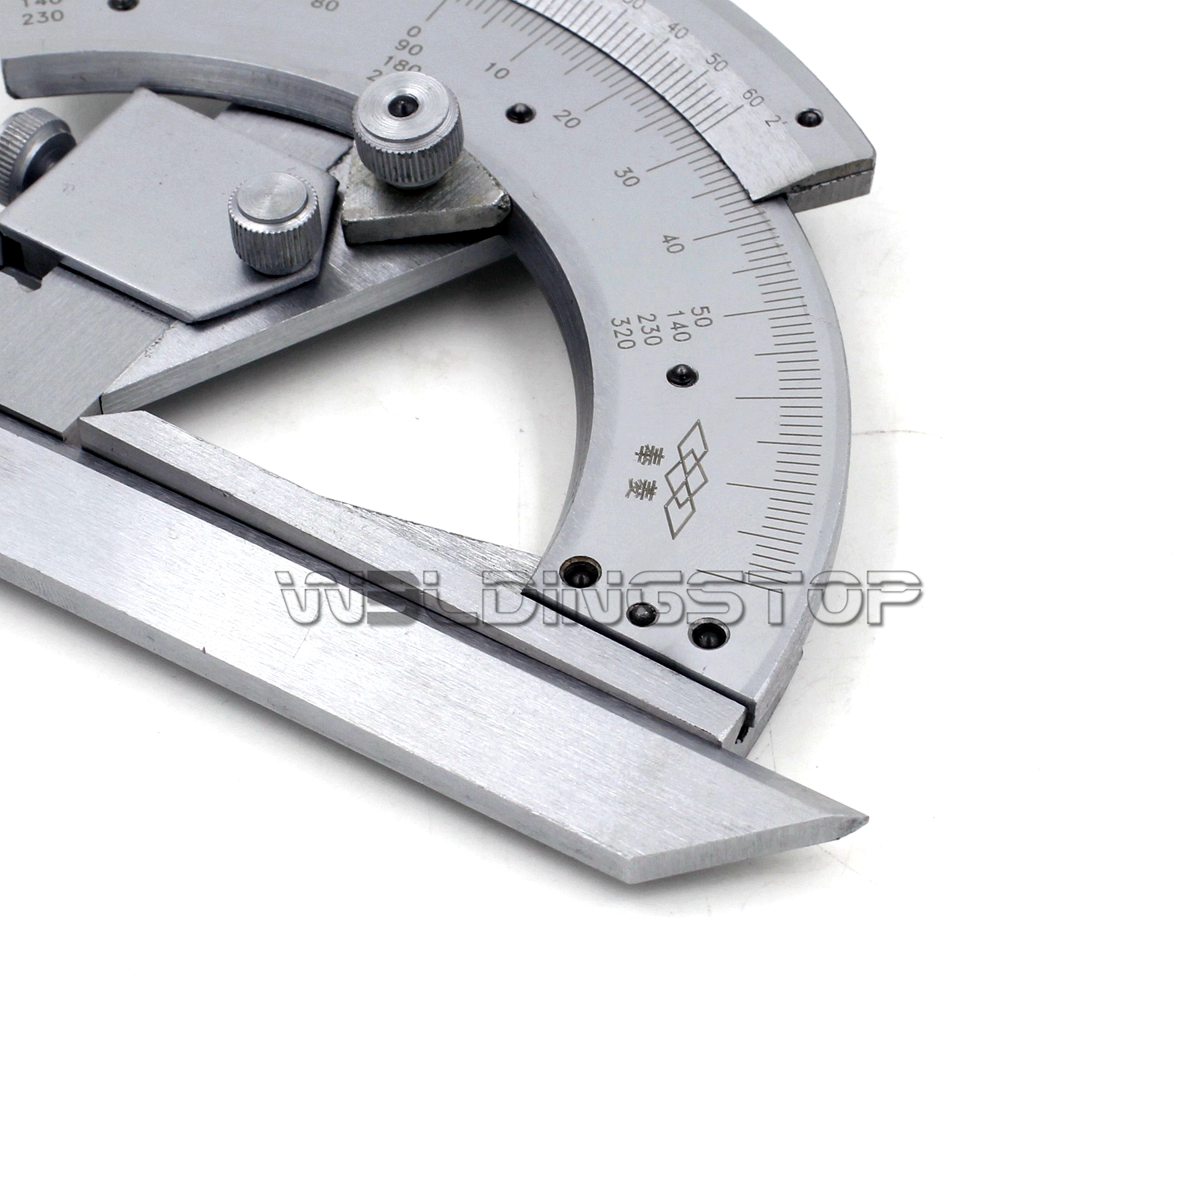 Universal Bevel Protractor 320 degree Angular Dial Stainless steel angle Gauge 